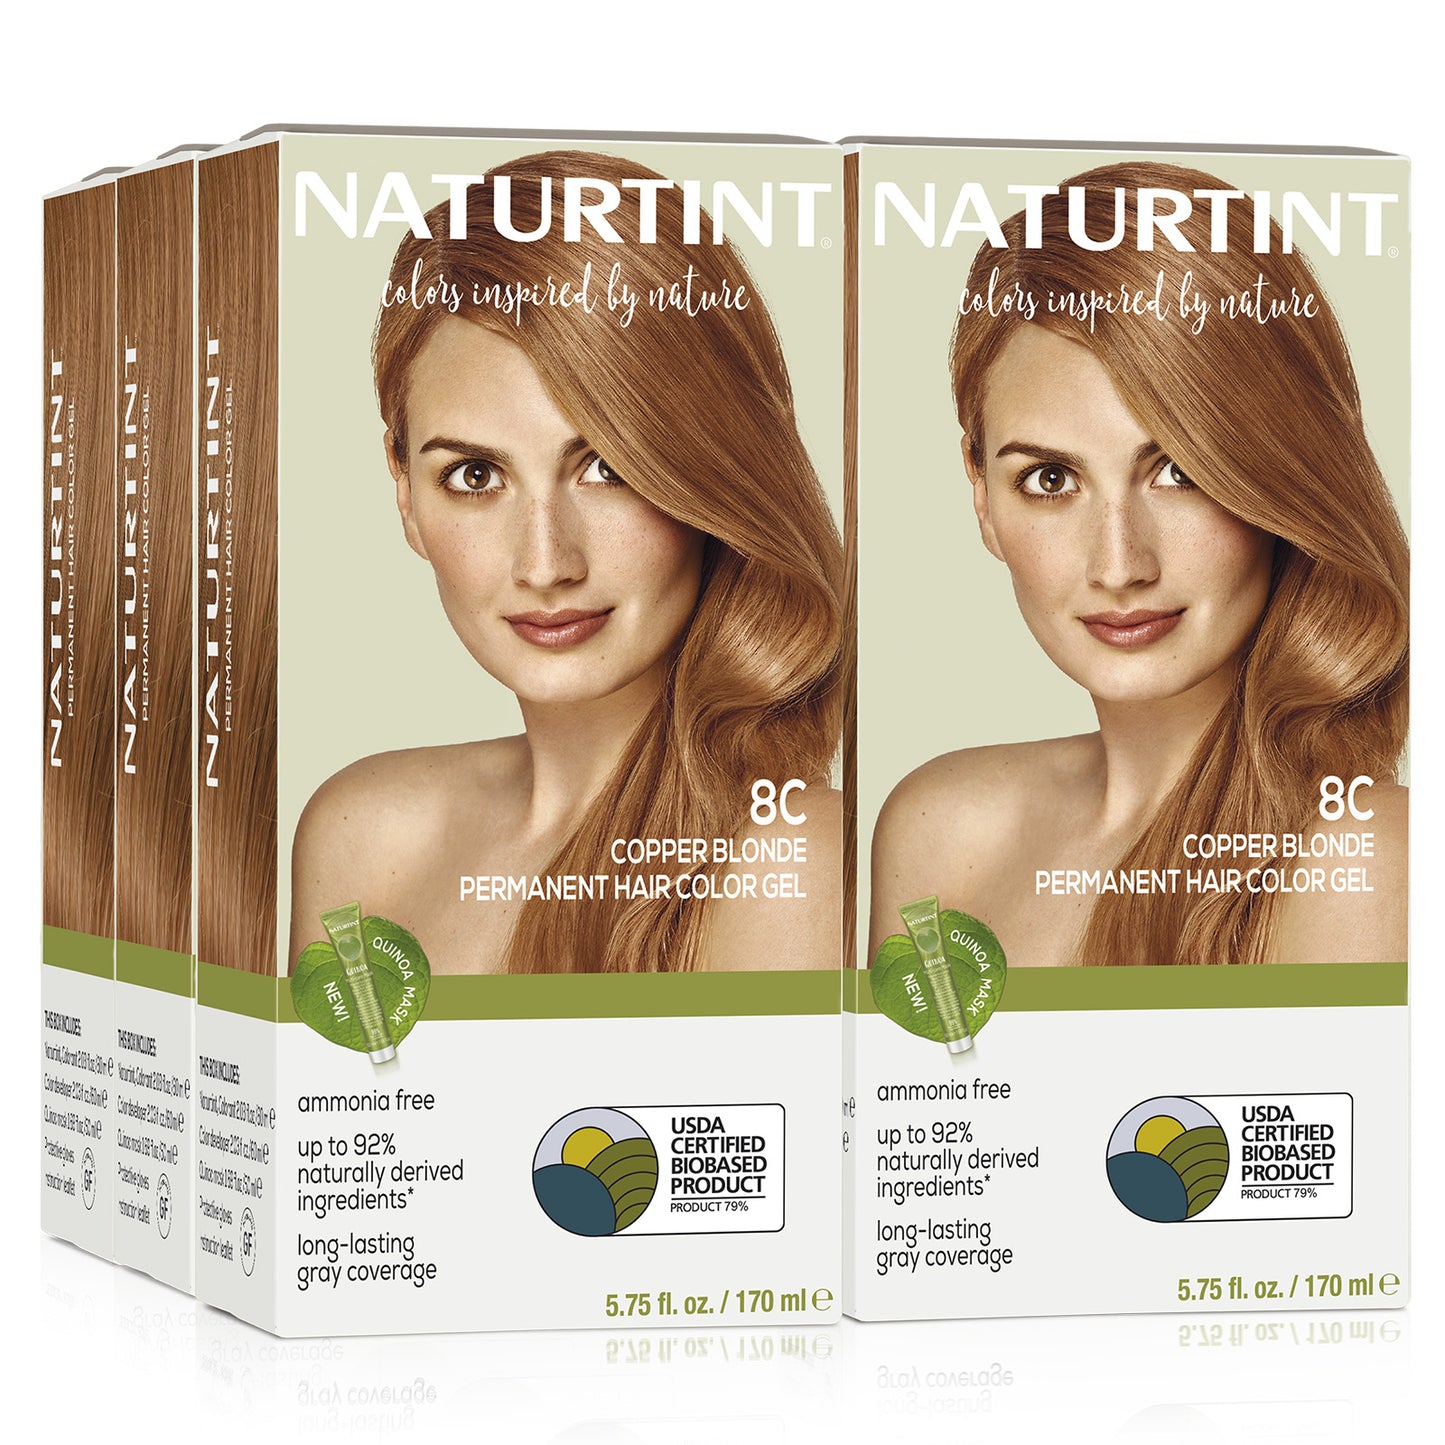 Naturtint Permanent Hair Color 8C Copper Blonde (Packaging may vary)